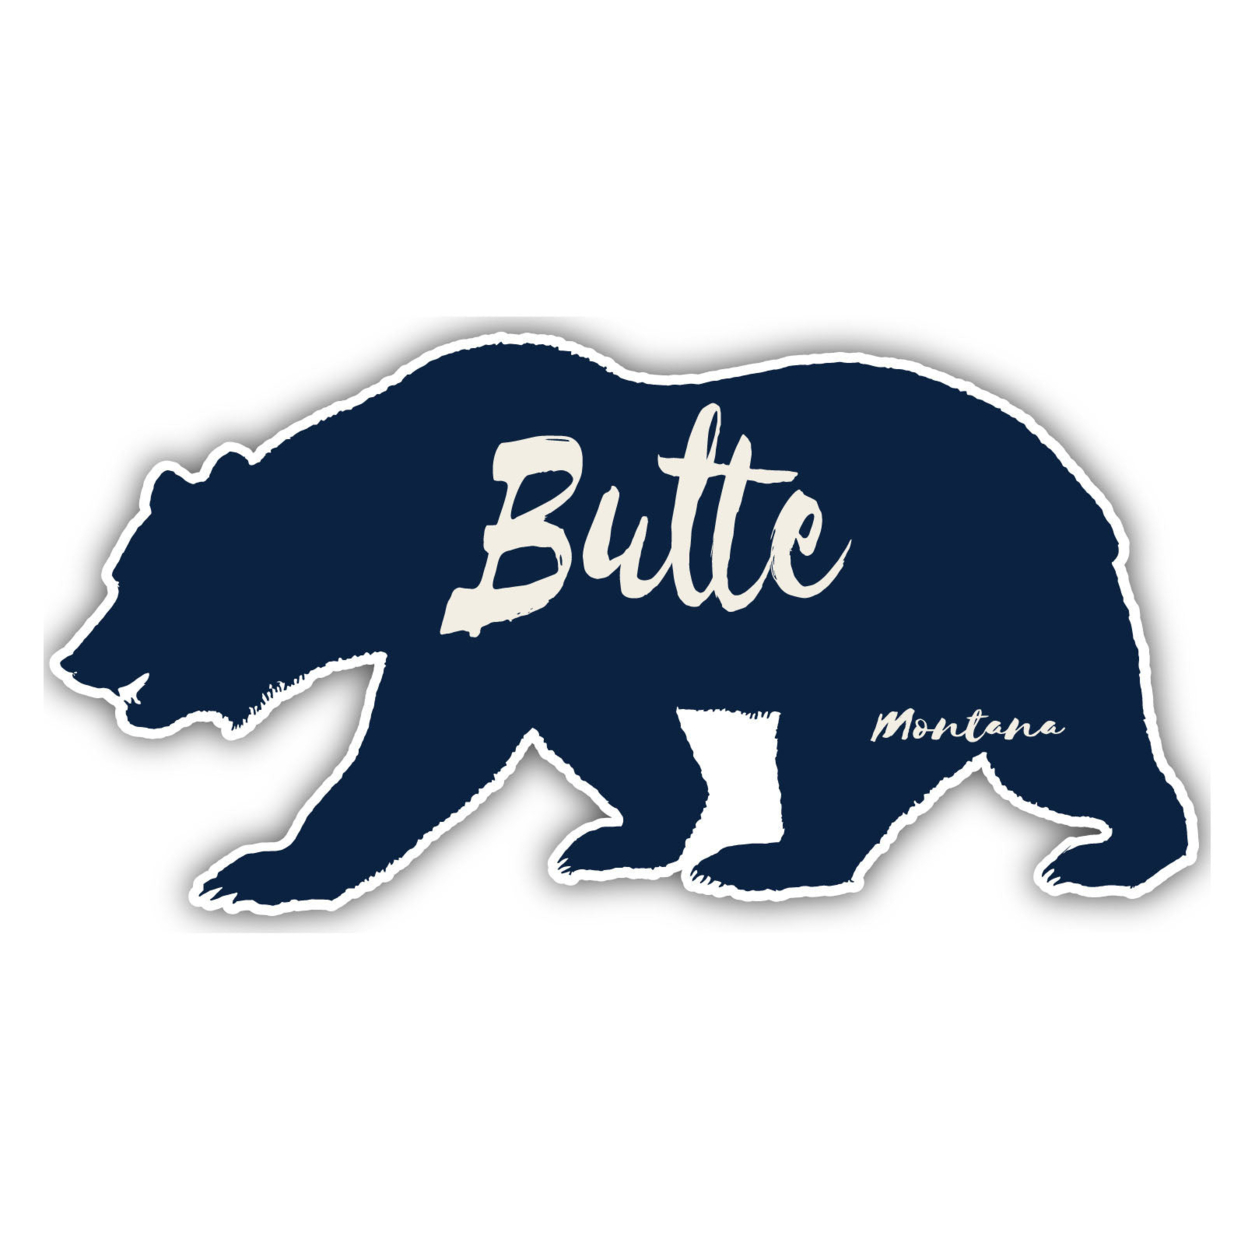 Butte Montana Souvenir Decorative Stickers (Choose Theme And Size) - 4-Pack, 4-Inch, Camp Life